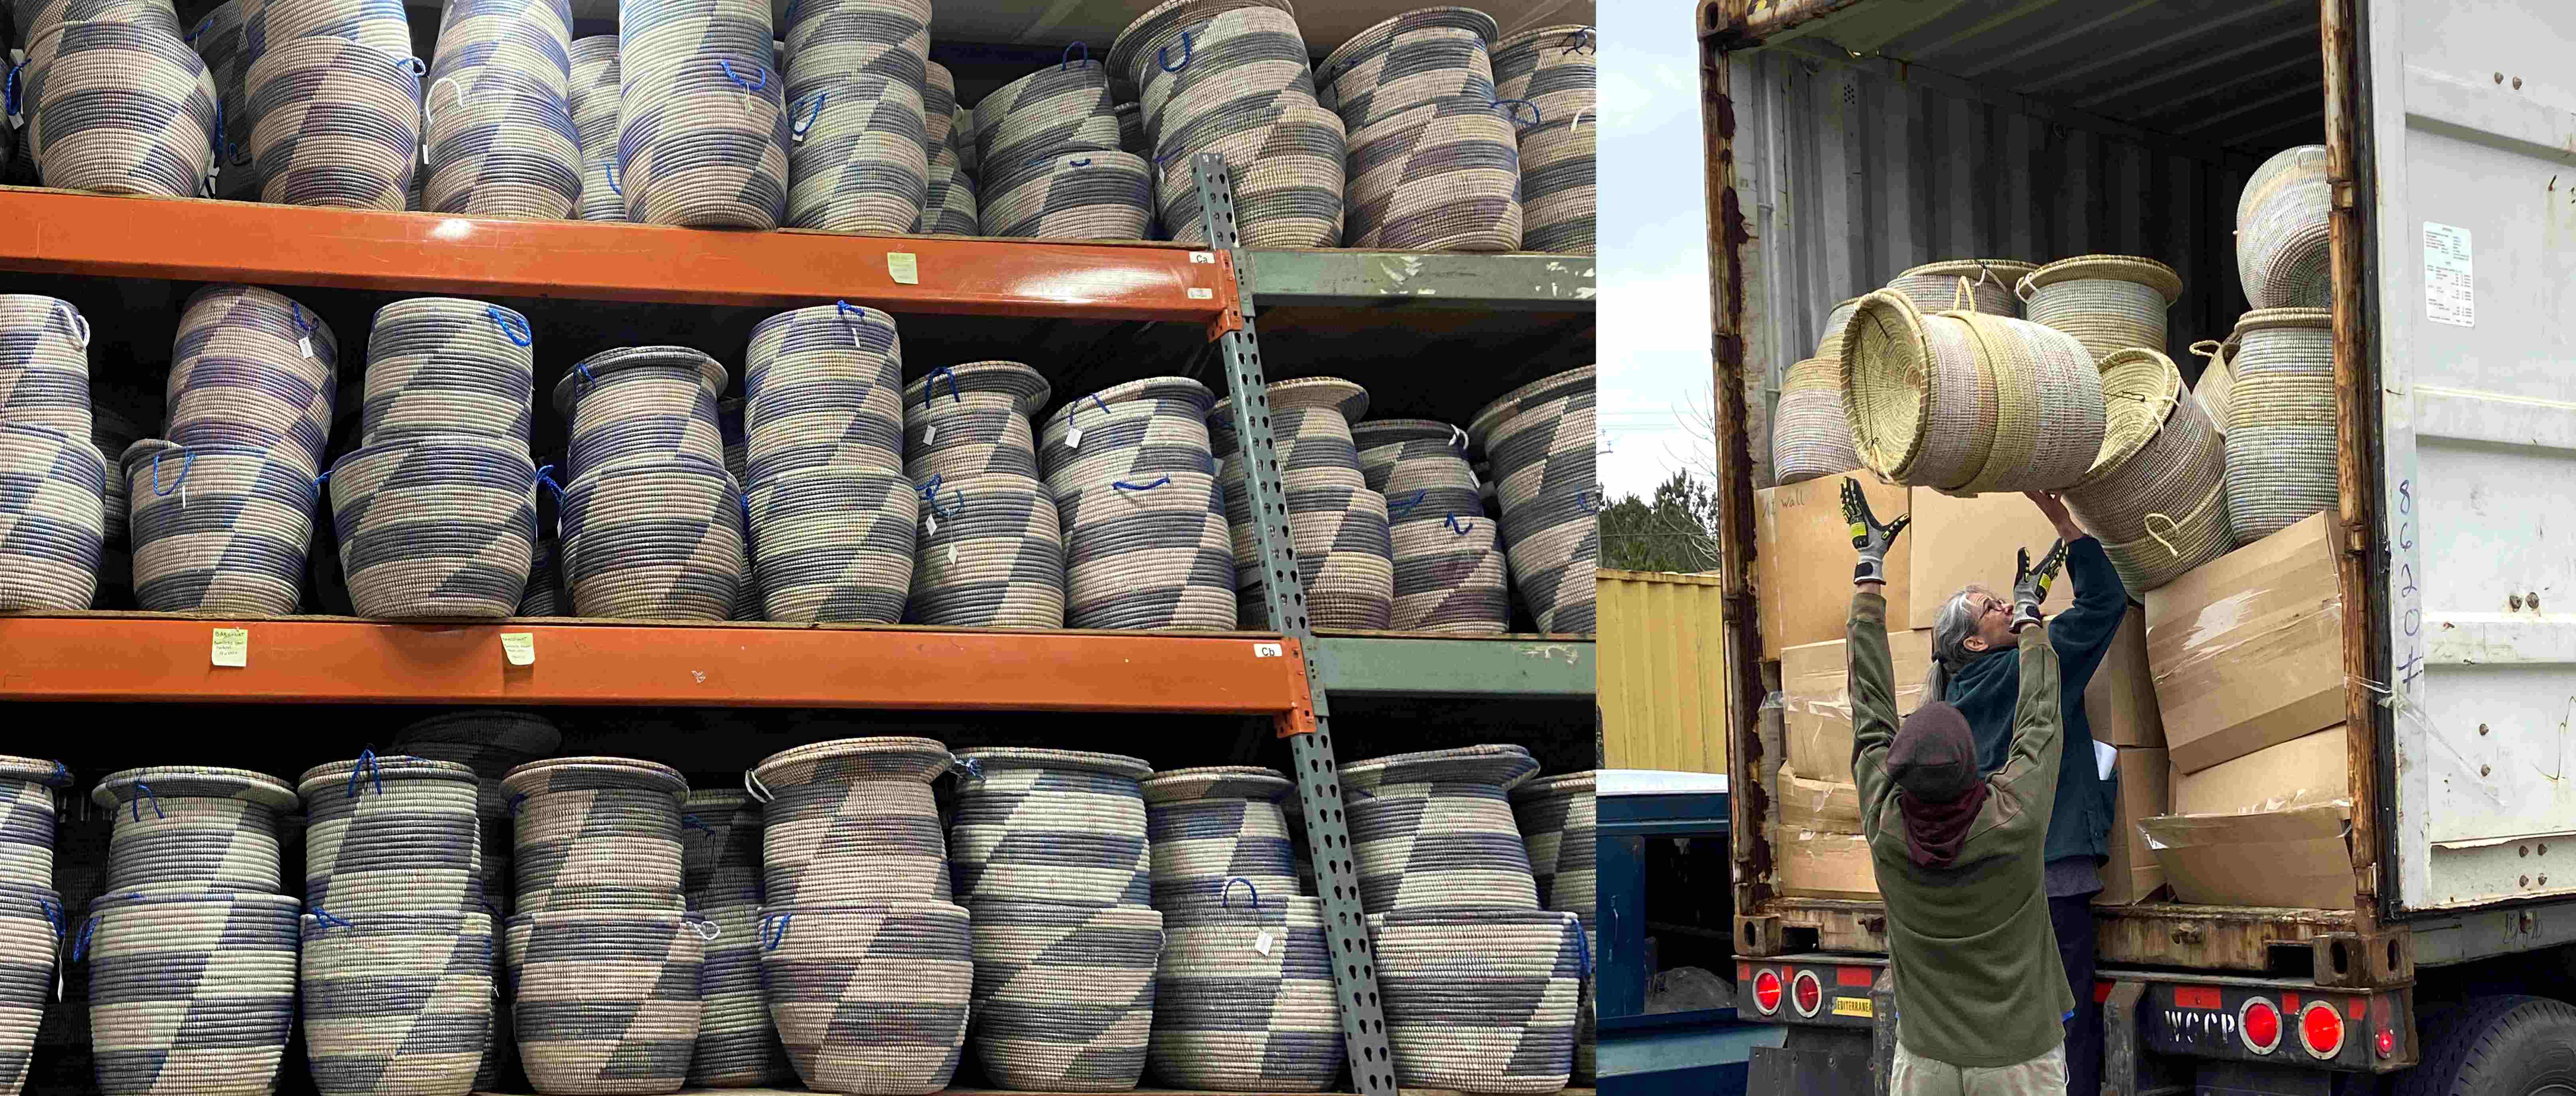 Mbare's warehouse in Athens, Ga, offloading baskets